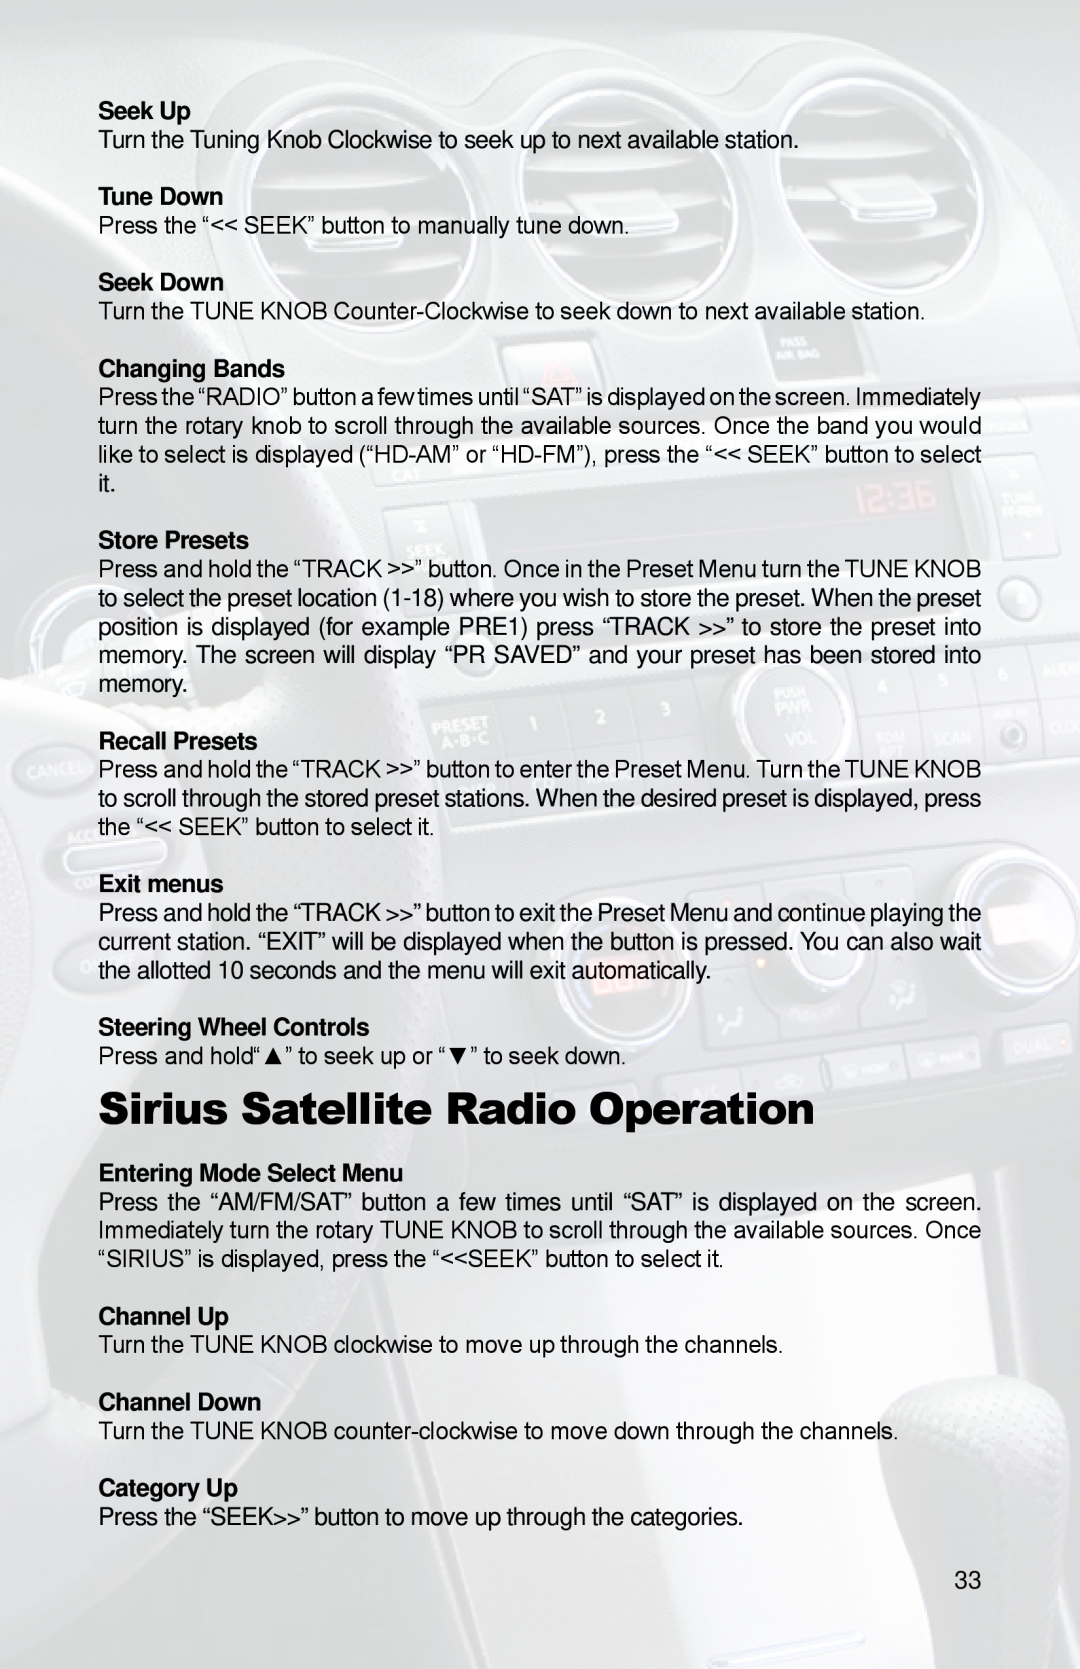 iSimple PGHNI2 owner manual Sirius Satellite Radio Operation, Press the “<< SEEK” button to manually tune down 